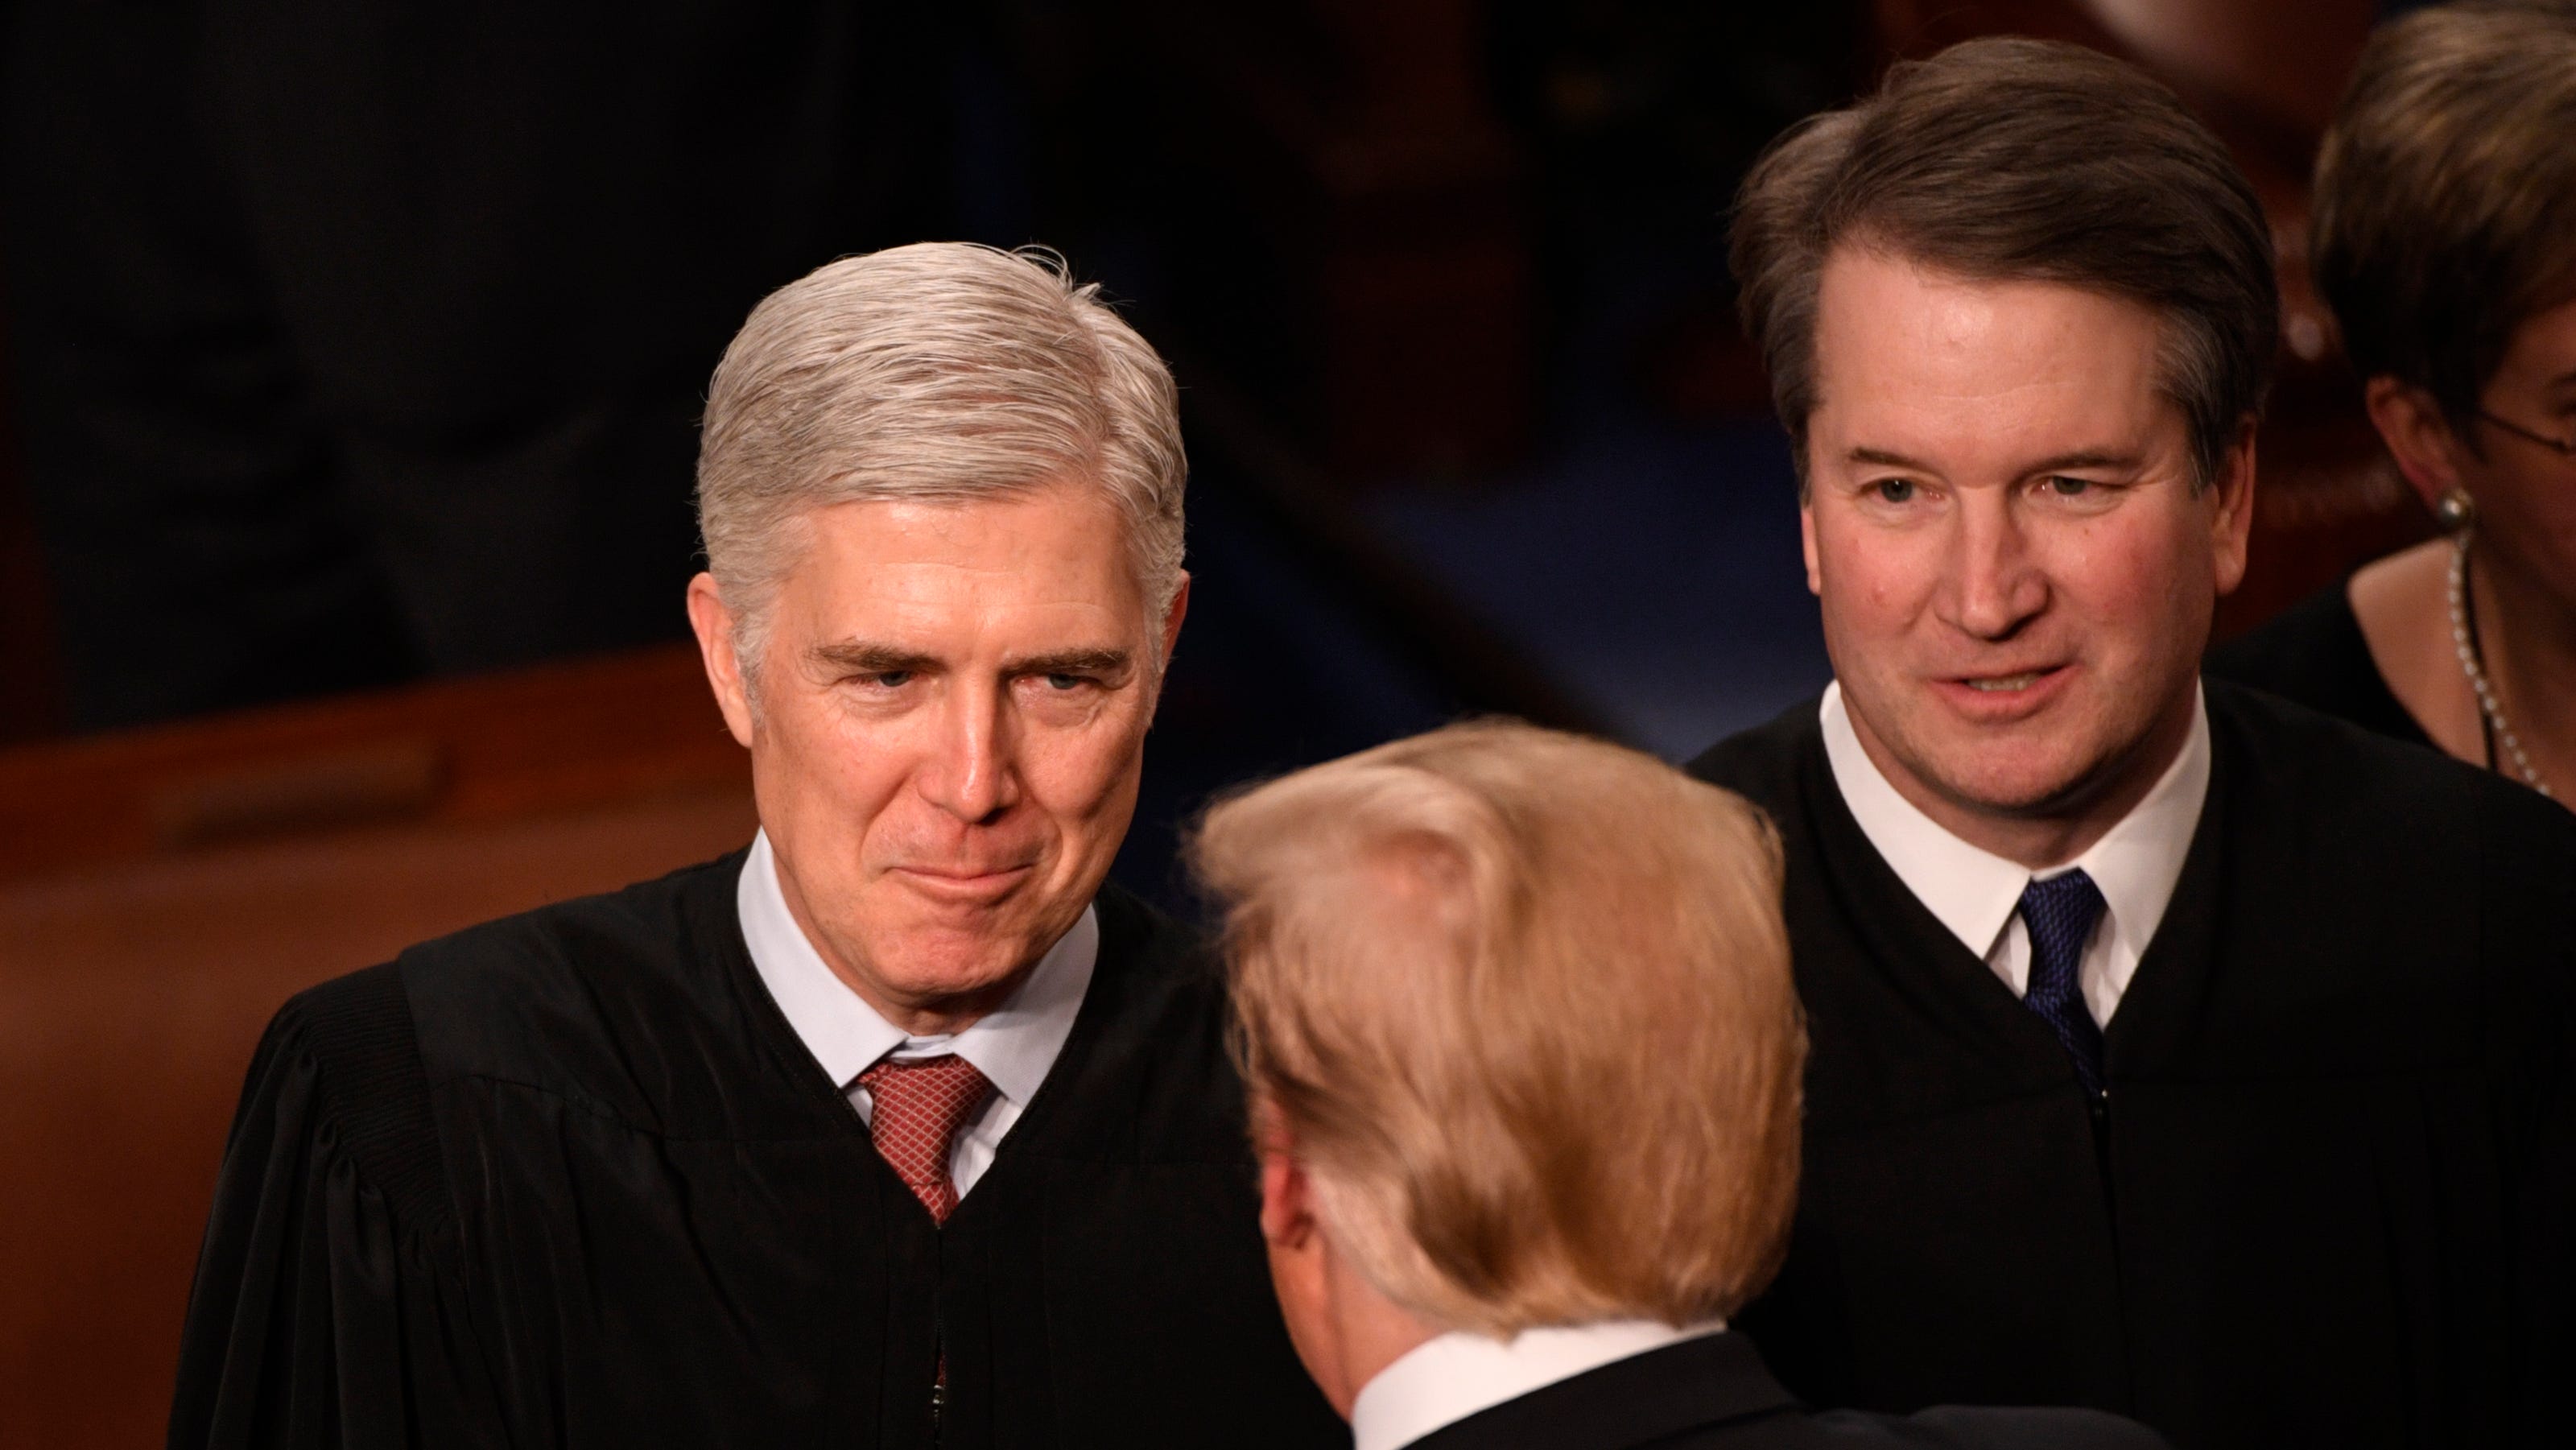 Brett Kavanaugh Neil Gorsuch Trump S Justices Show Independence